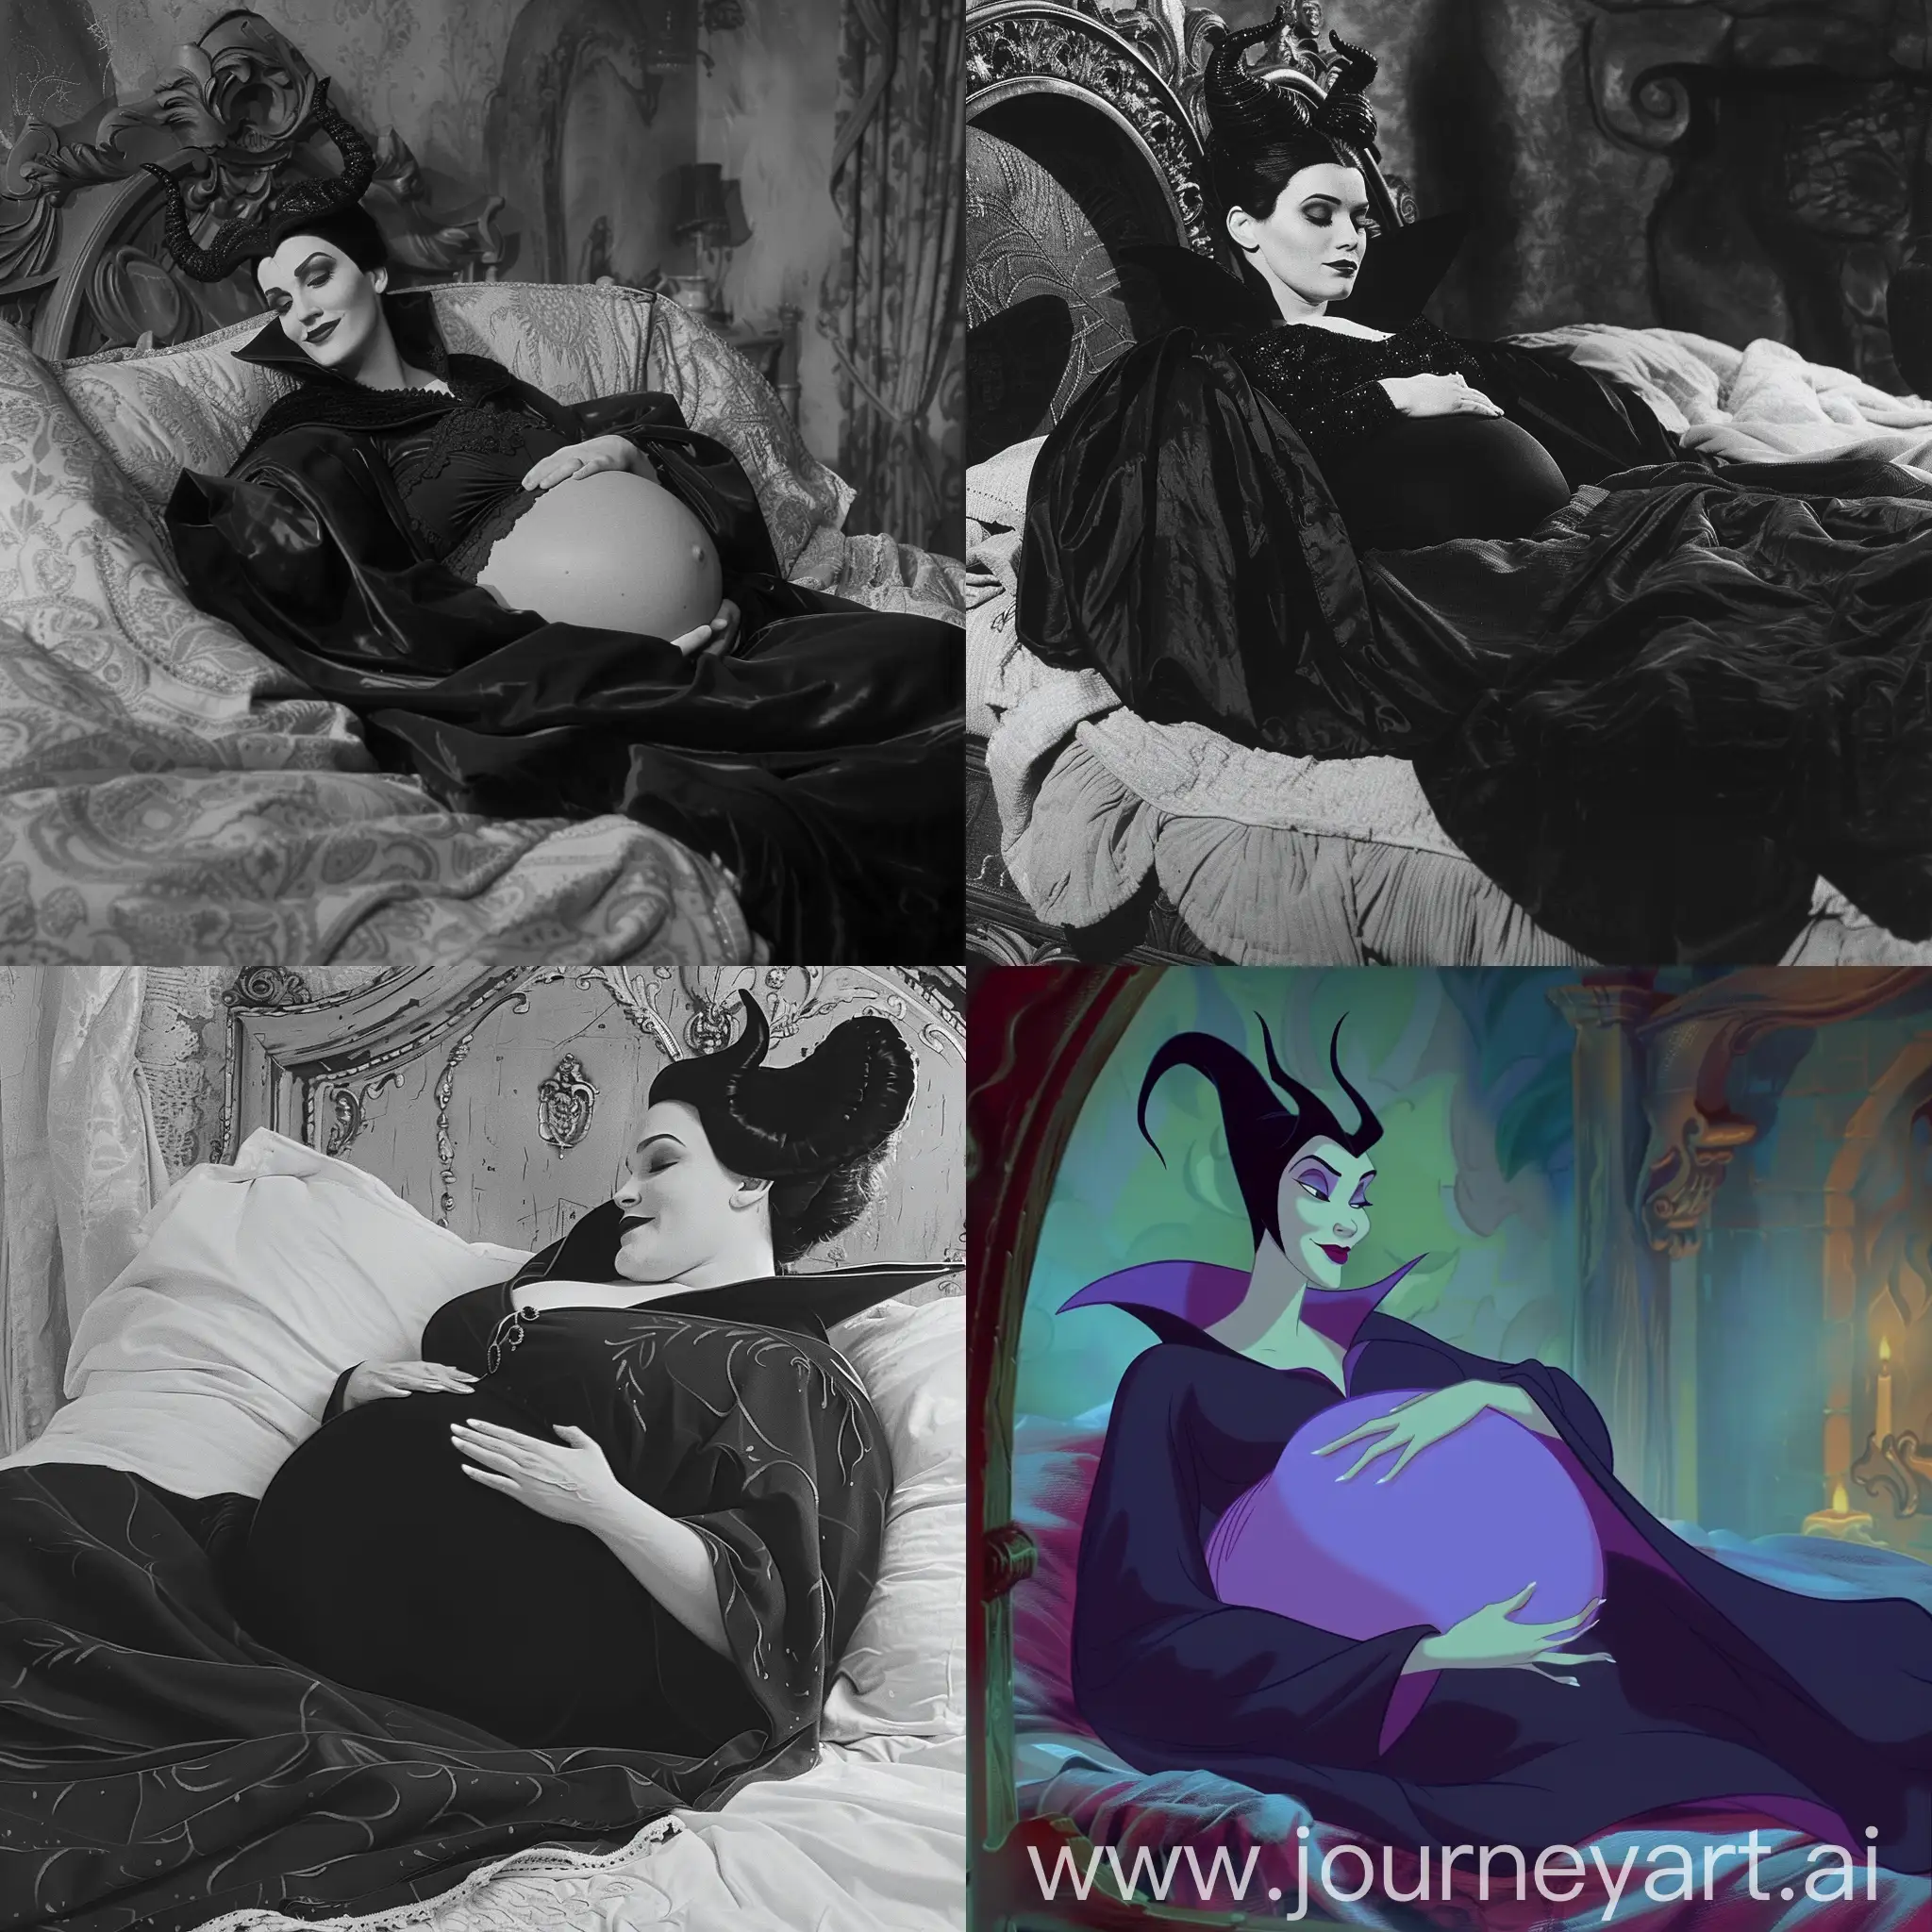 Maleficent-Pregnant-Resting-in-Bed-with-a-Large-Belly